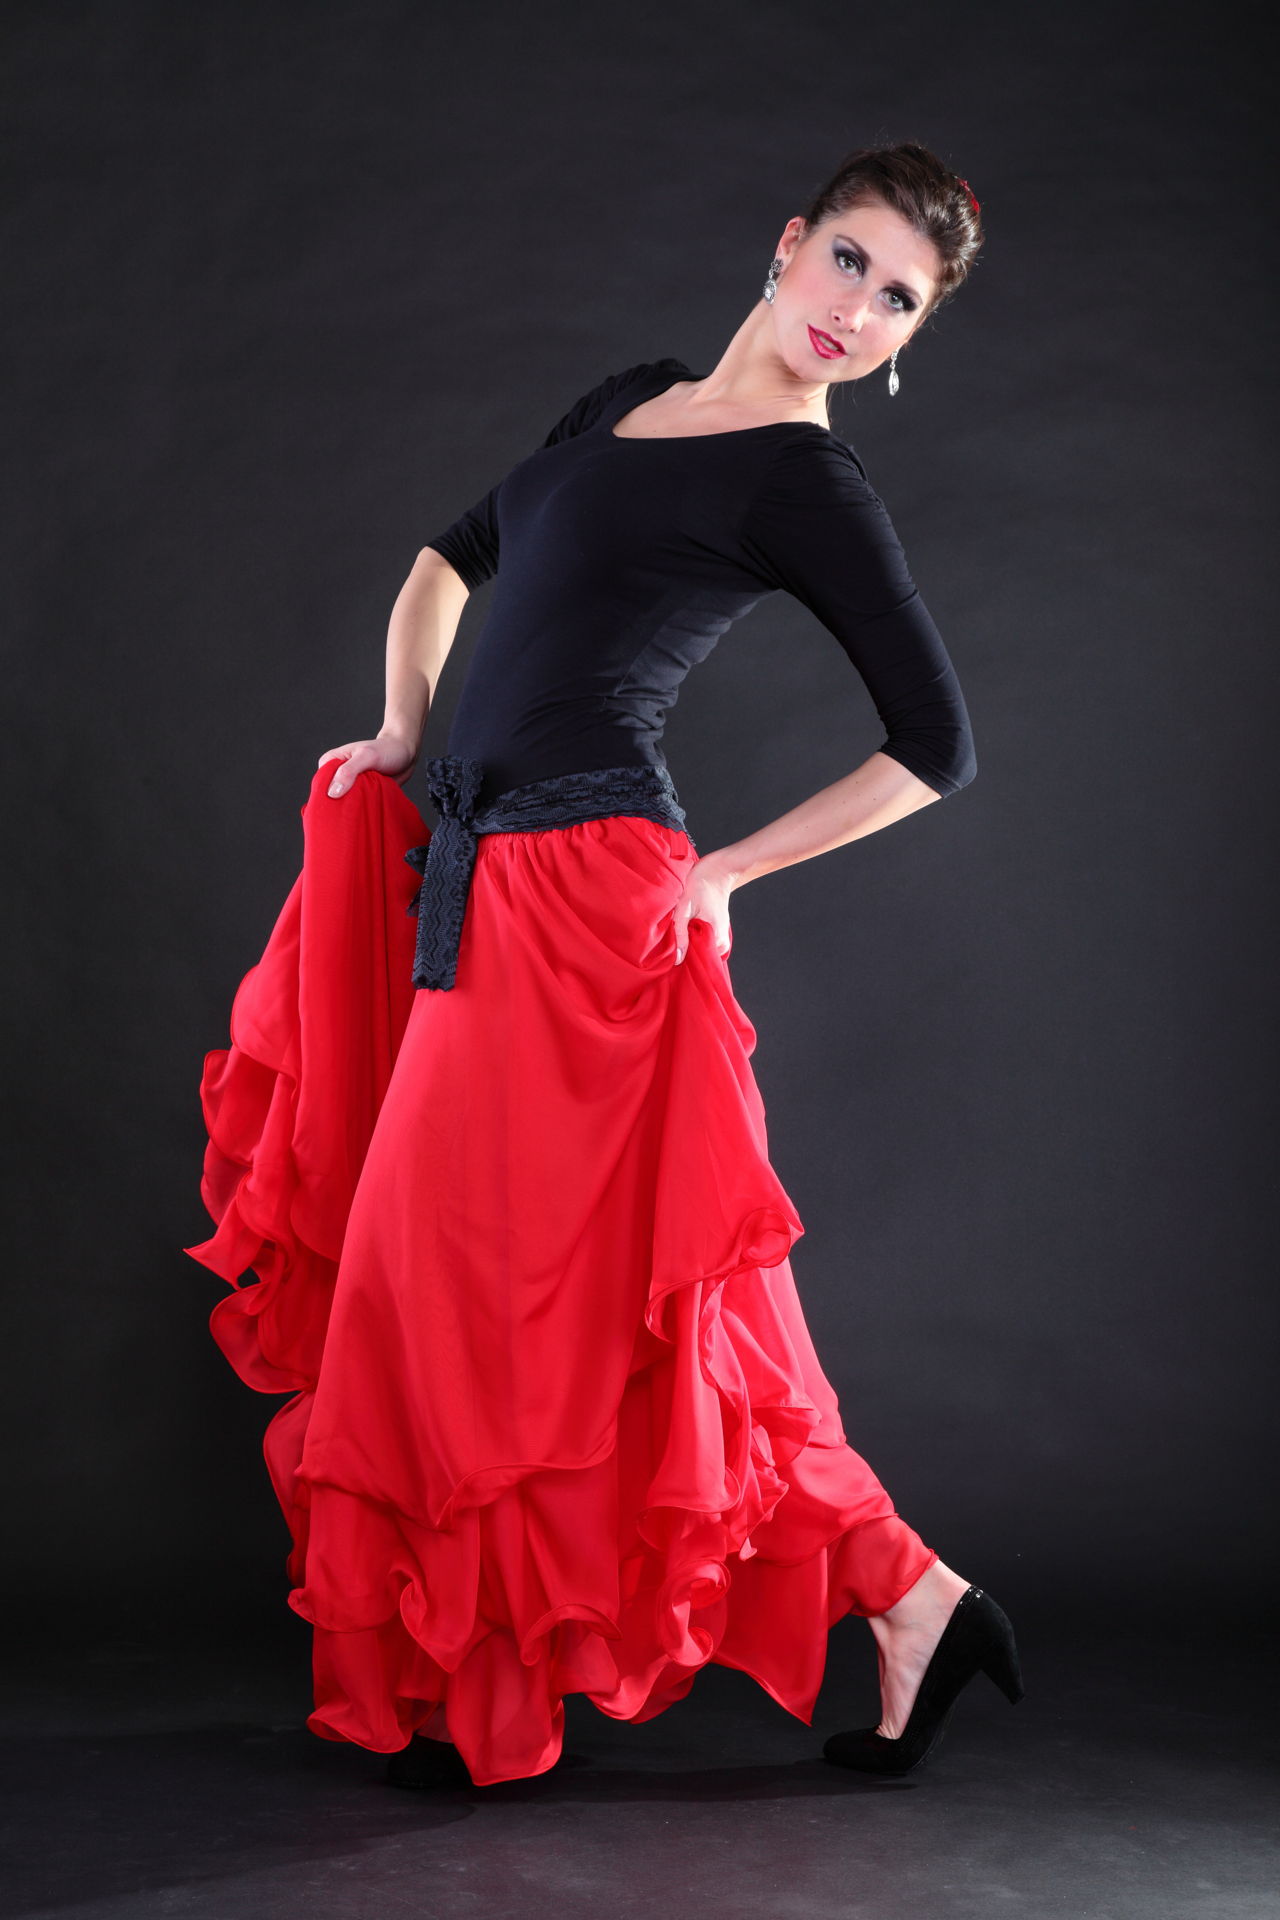 How to Make a Frilly and Florid Mexican Dance Dress